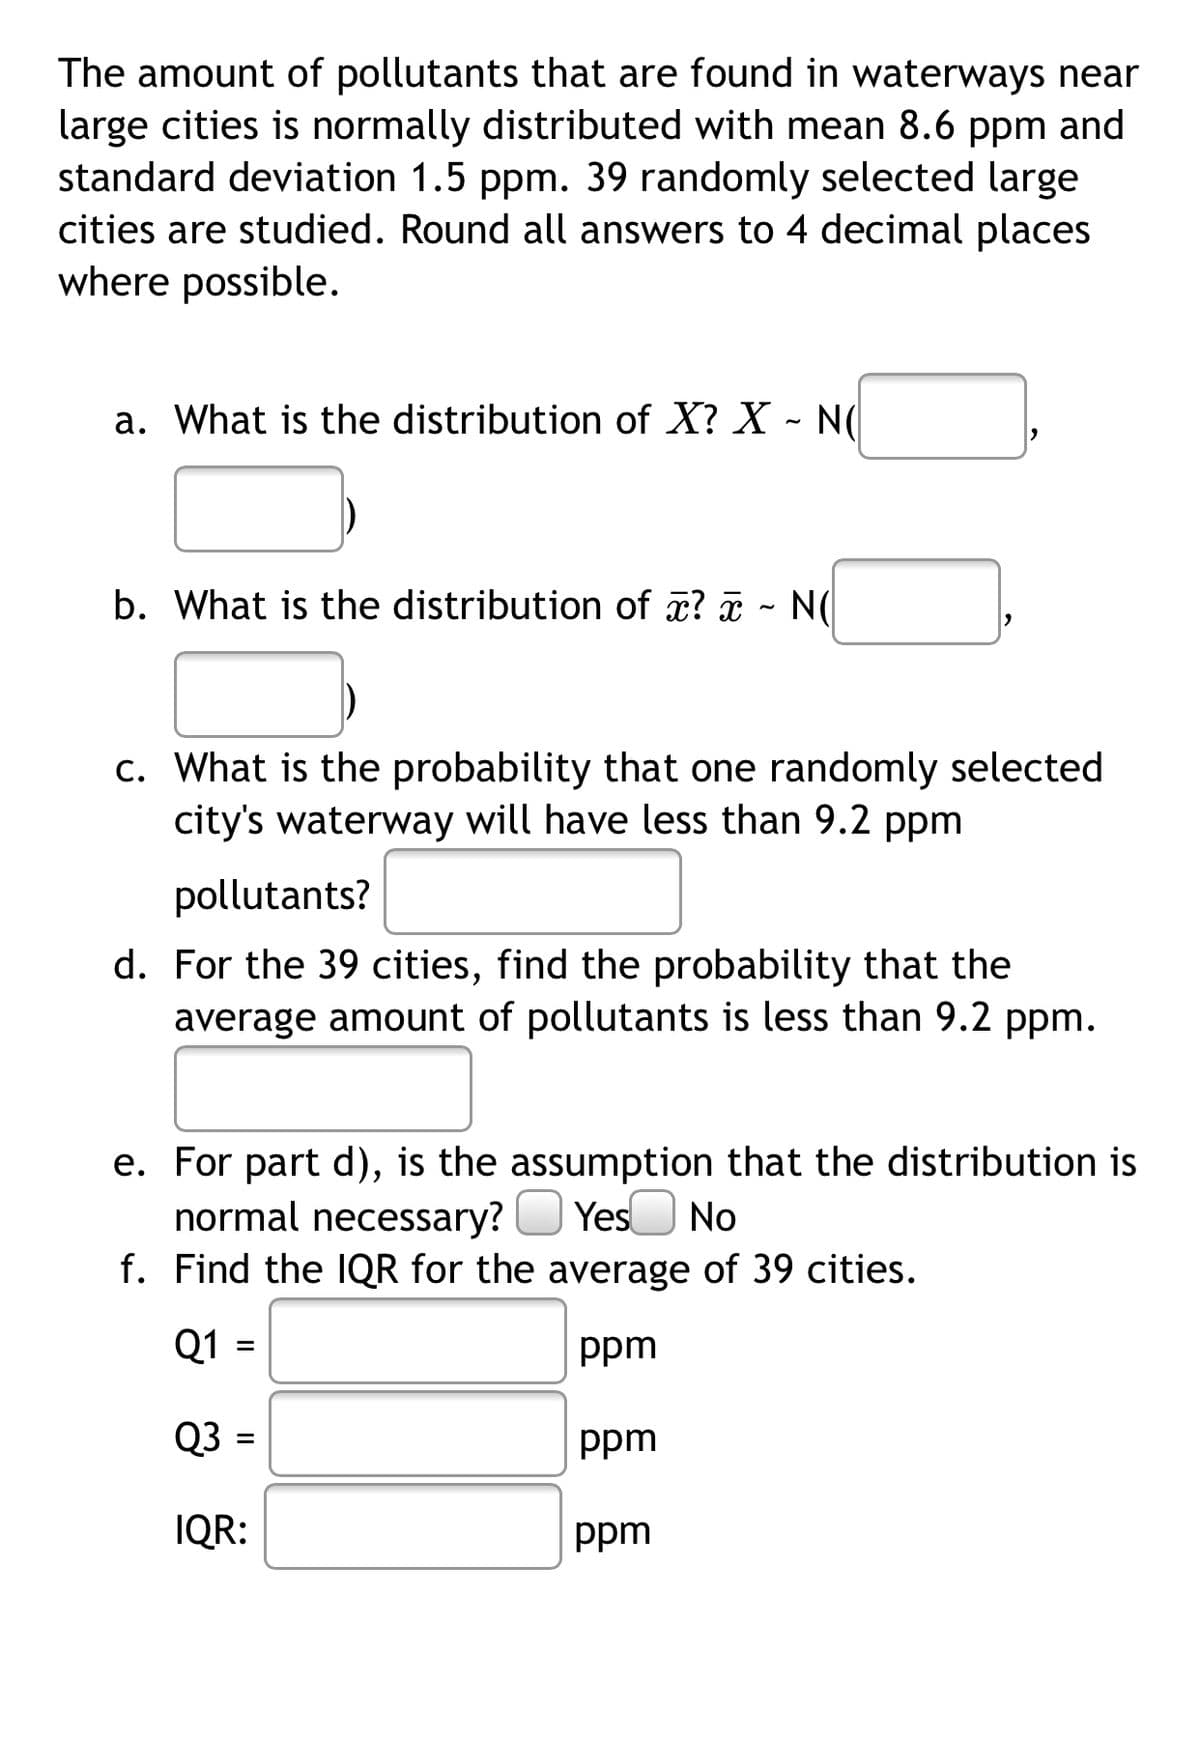 The amount of pollutants that are found in waterways near
large cities is normally distributed with mean 8.6 ppm and
standard deviation 1.5 ppm. 39 randomly selected large
cities are studied. Round all answers to 4 decimal places
where possible.
a. What is the distribution of X? X - N(|
b. What is the distribution of ? - N(
c. What is the probability that one randomly selected
city's waterway will have less than 9.2 ppm
pollutants?
d. For the 39 cities, find the probability that the
average amount of pollutants is less than 9.2 ppm.
e. For part d), is the assumption that the distribution is
normal necessary?
f. Find the IQR for the average of 39 cities.
Yes
No
Q1
ppm
Q3
ppm
IQR:
ppm
II
